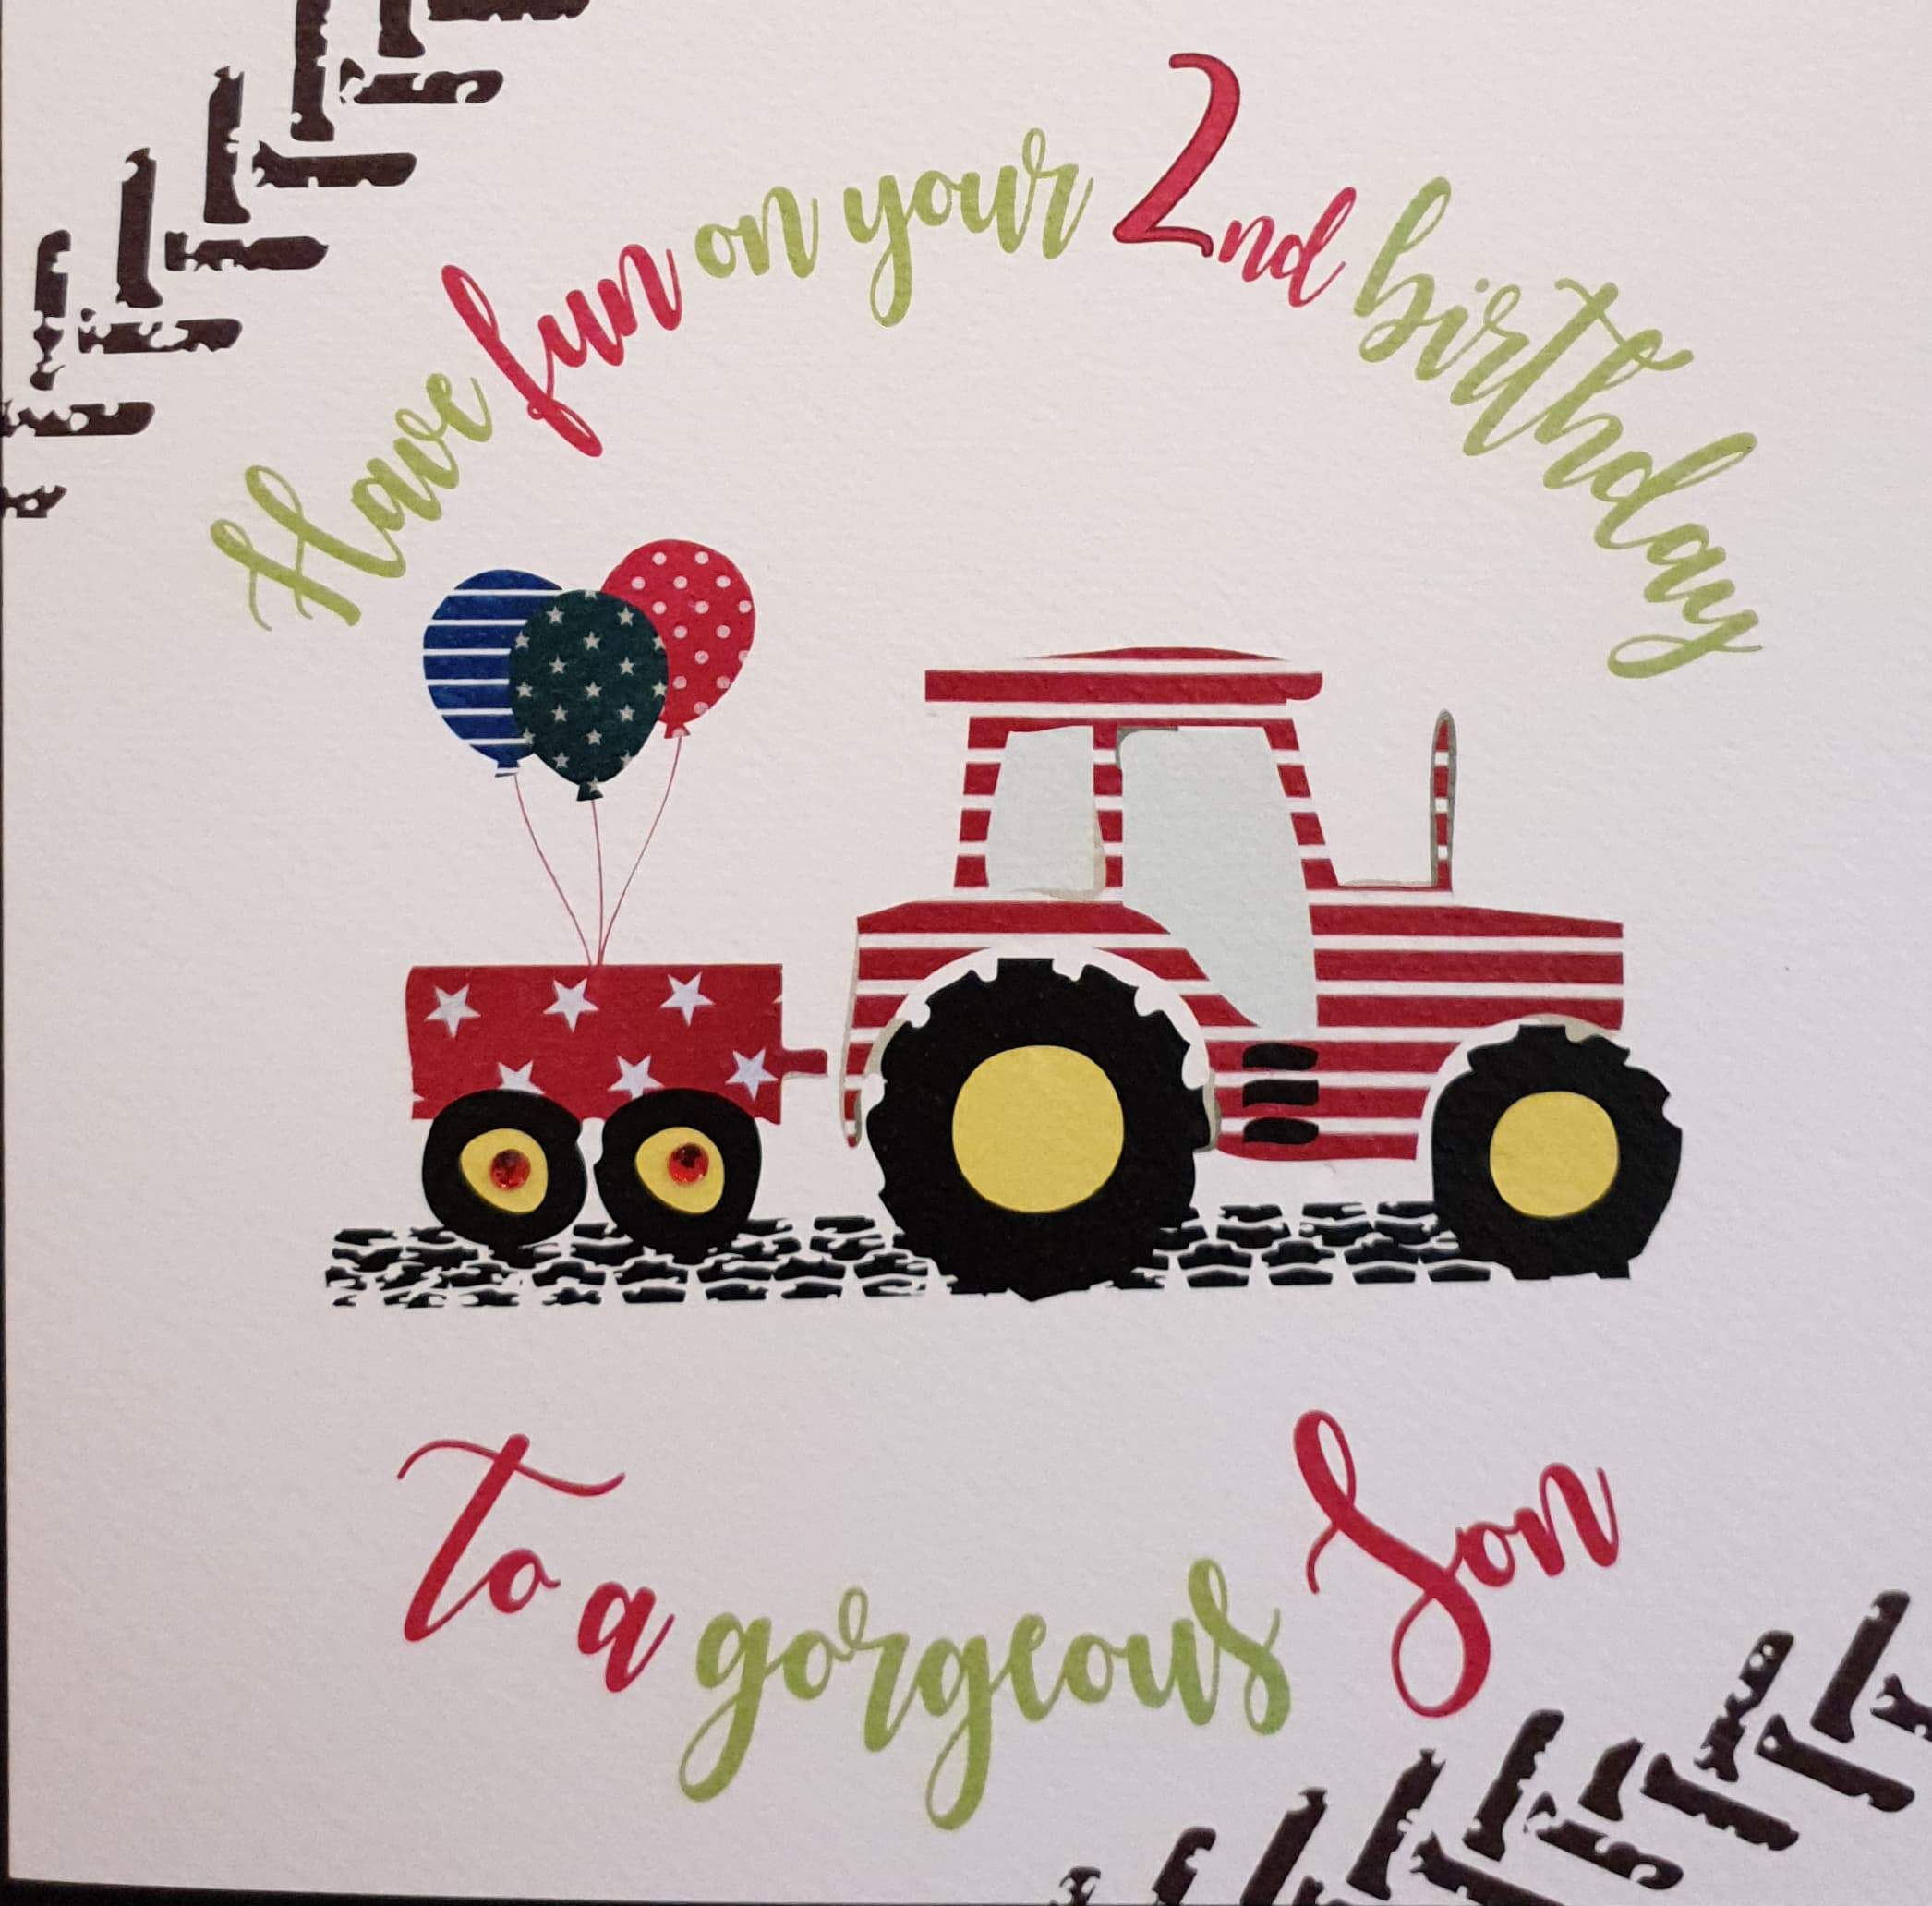 Birthday Card - Son - 2nd Birthday / Balloons Tied to Red & White Tractor Trailer